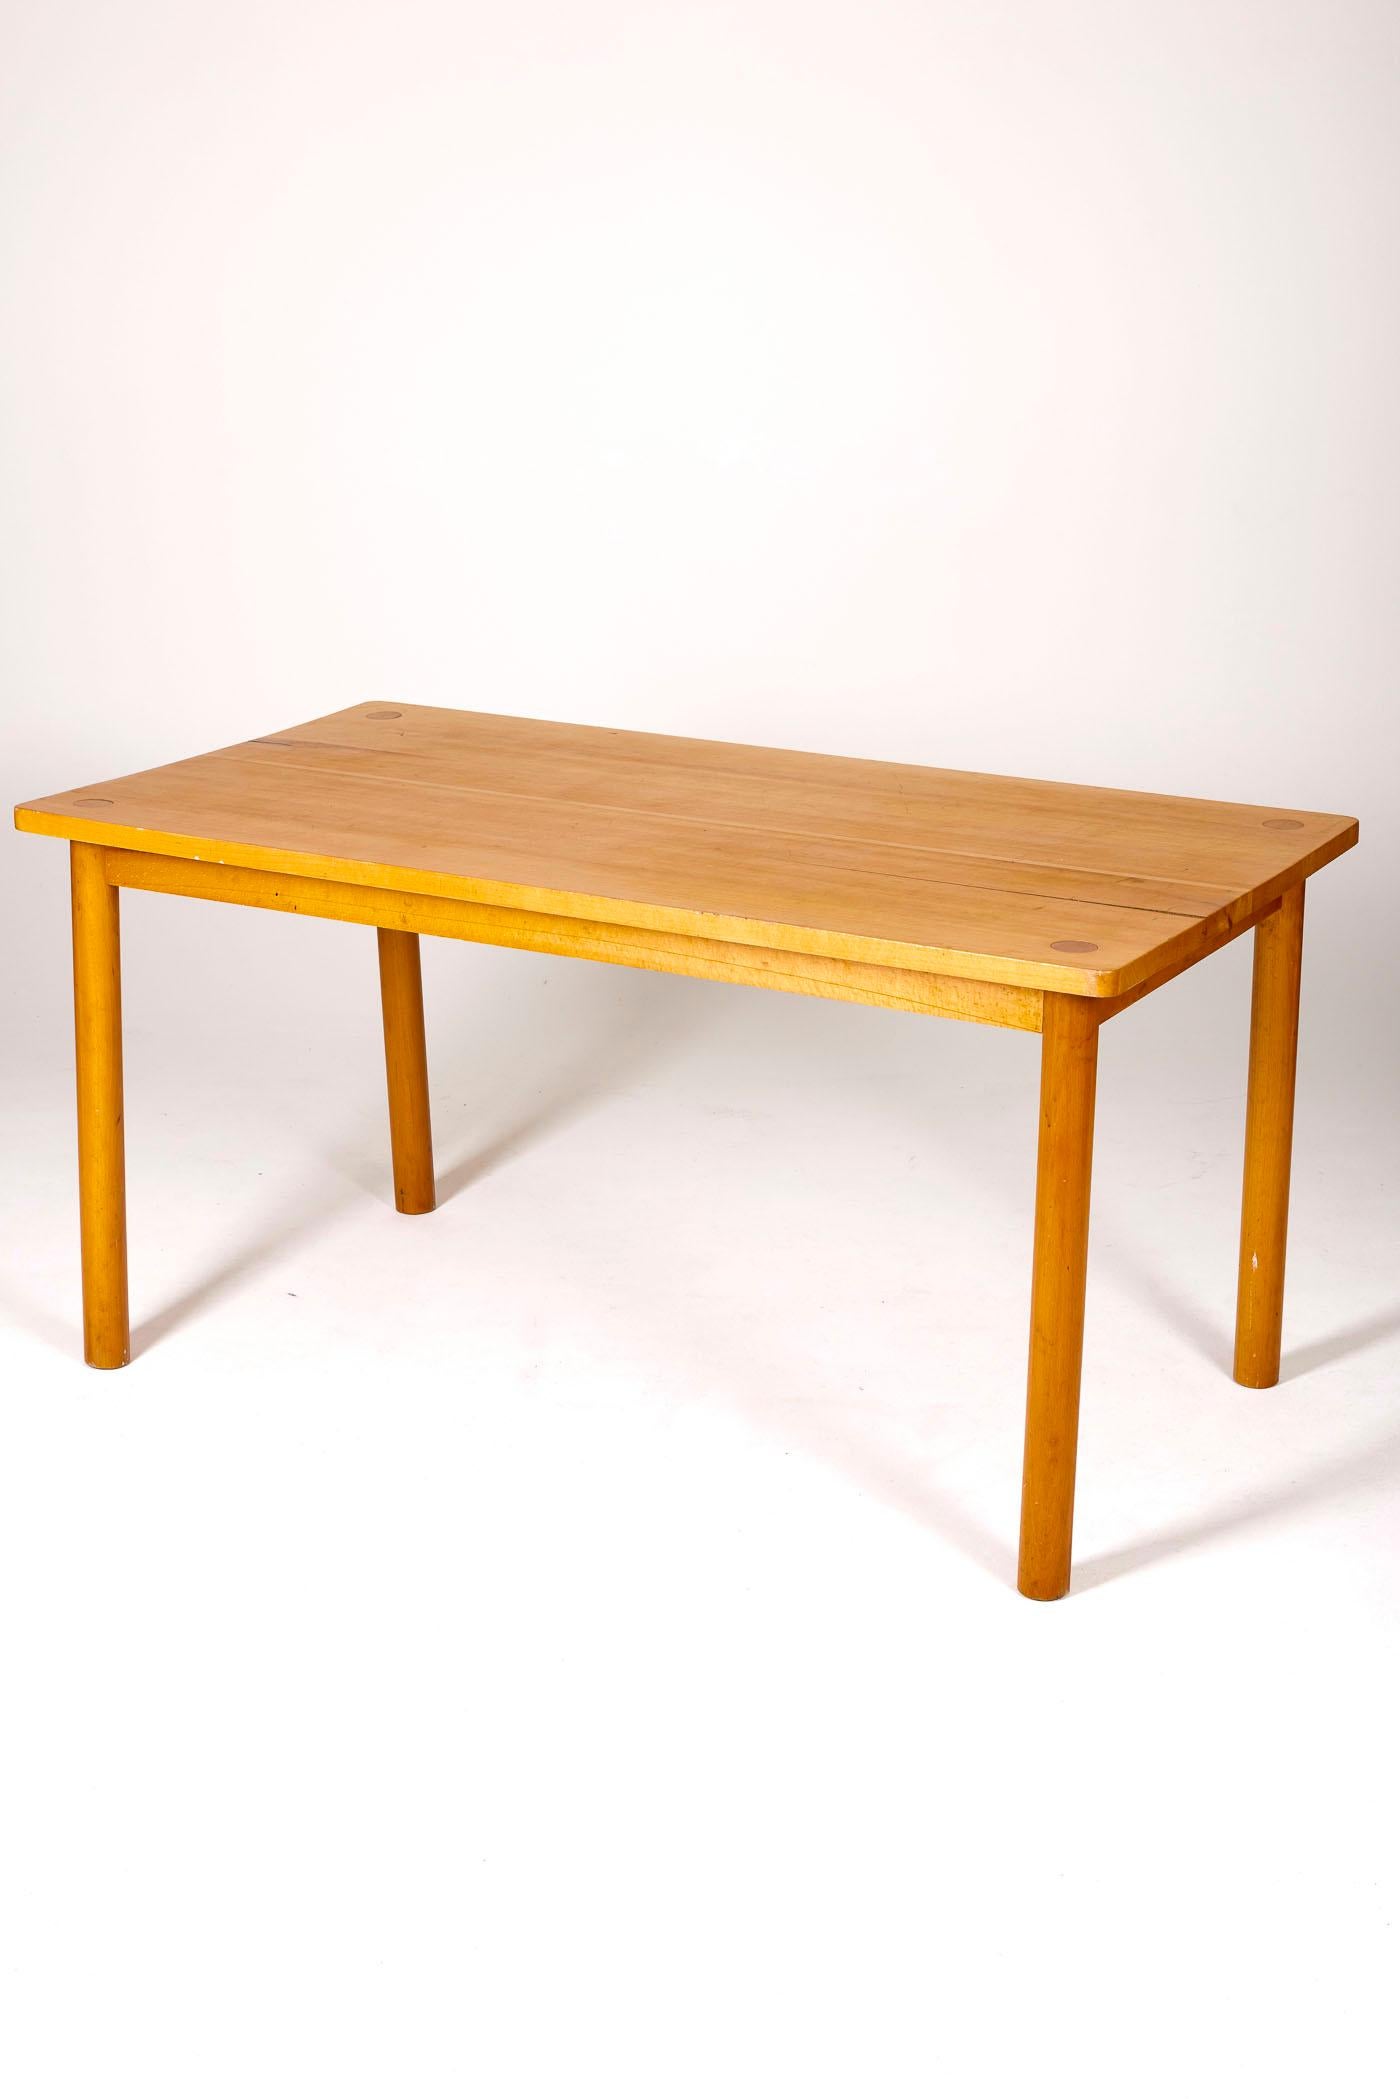 Wood Pierre Gauthier Delaye dining table For Sale